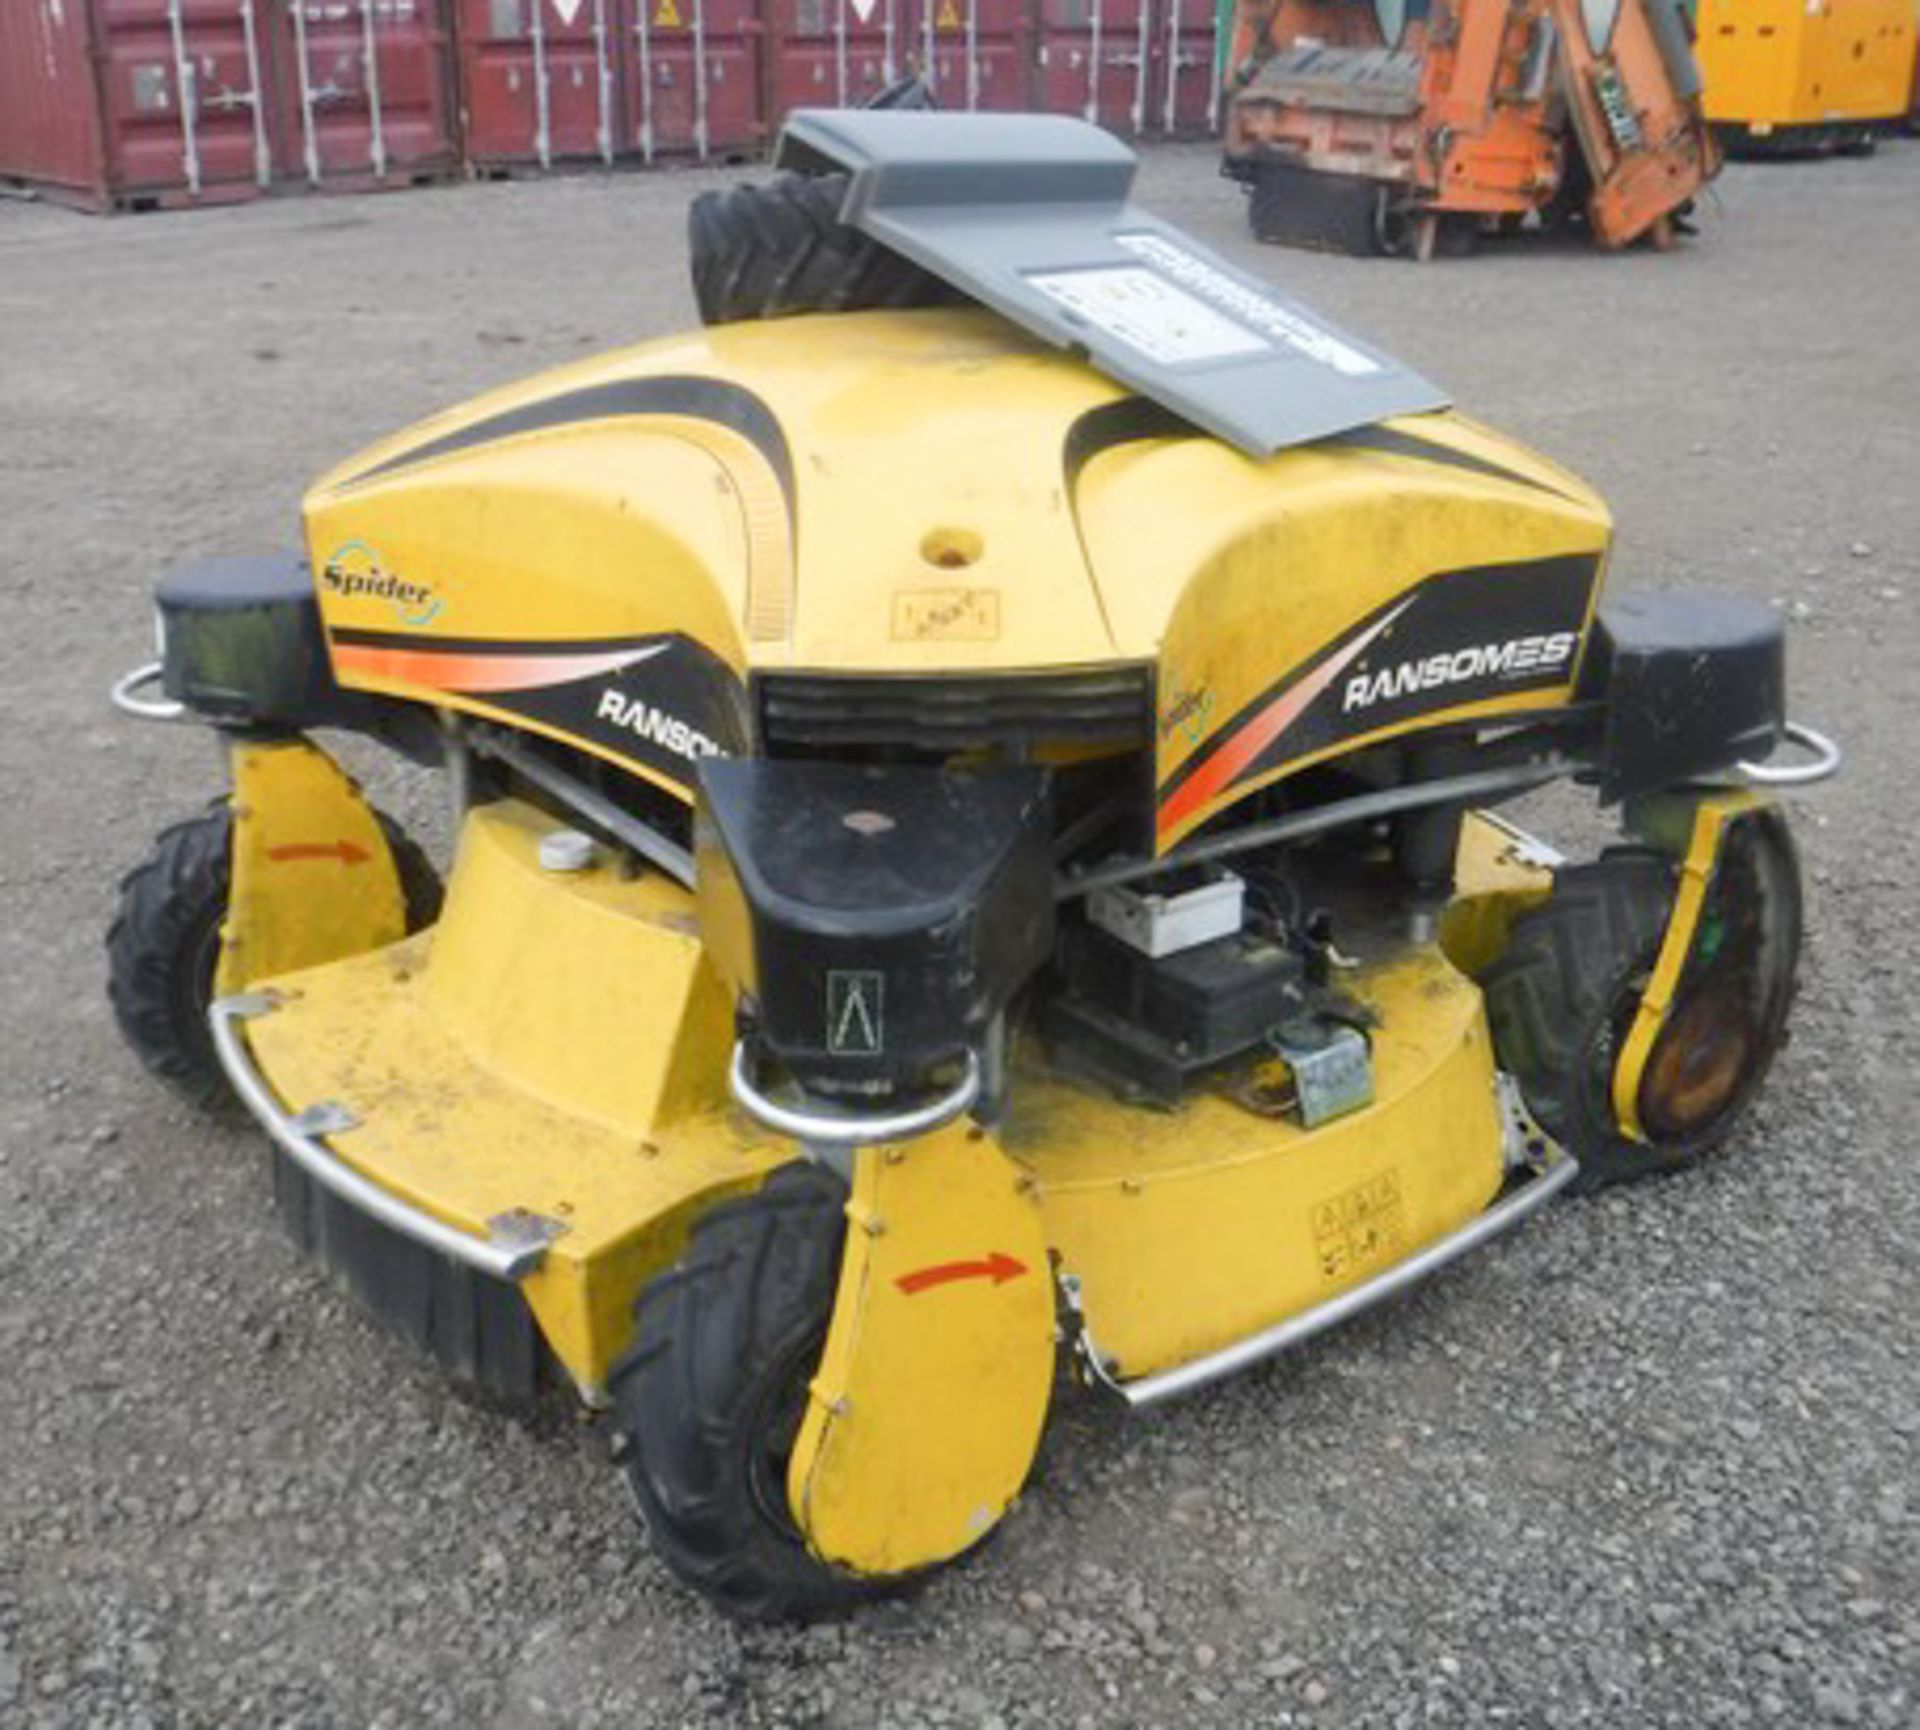 RANSOMES SPIDER self propelled grass cutter for spares or repair - Image 9 of 11